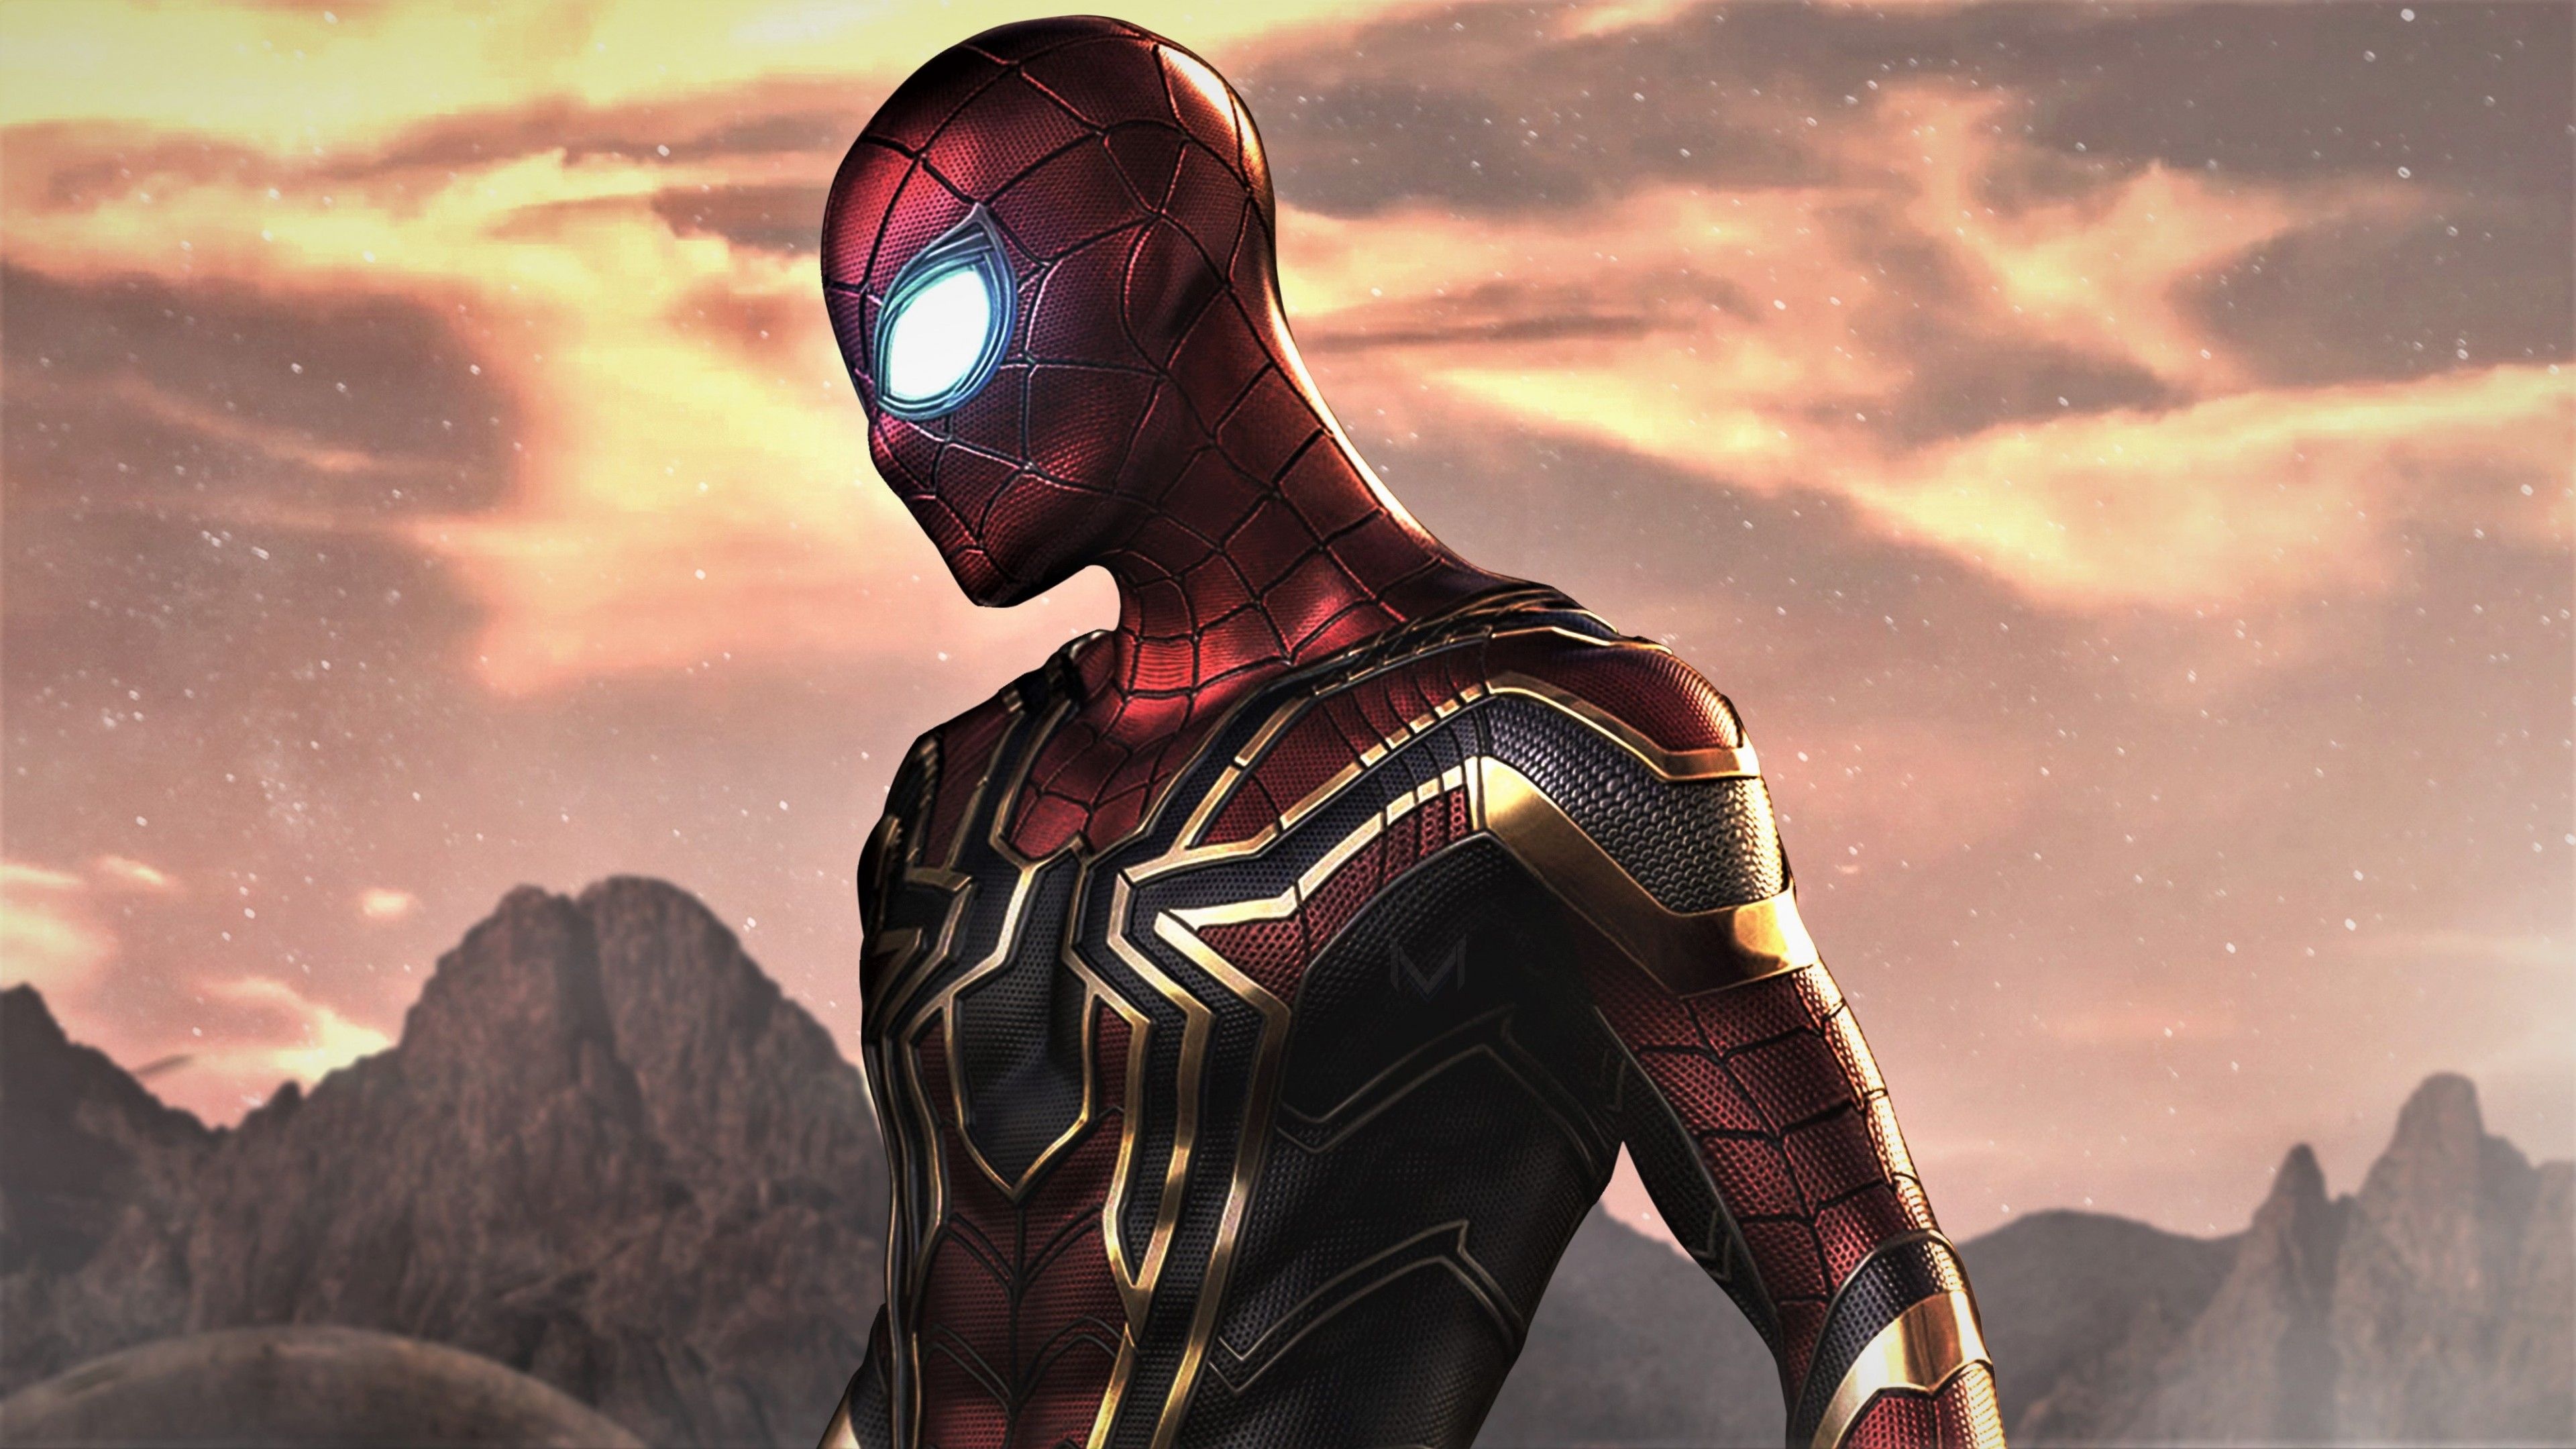 Tom Holland Far From Home, Computer wallpapers, High-resolution images, 3840x2160 4K Desktop